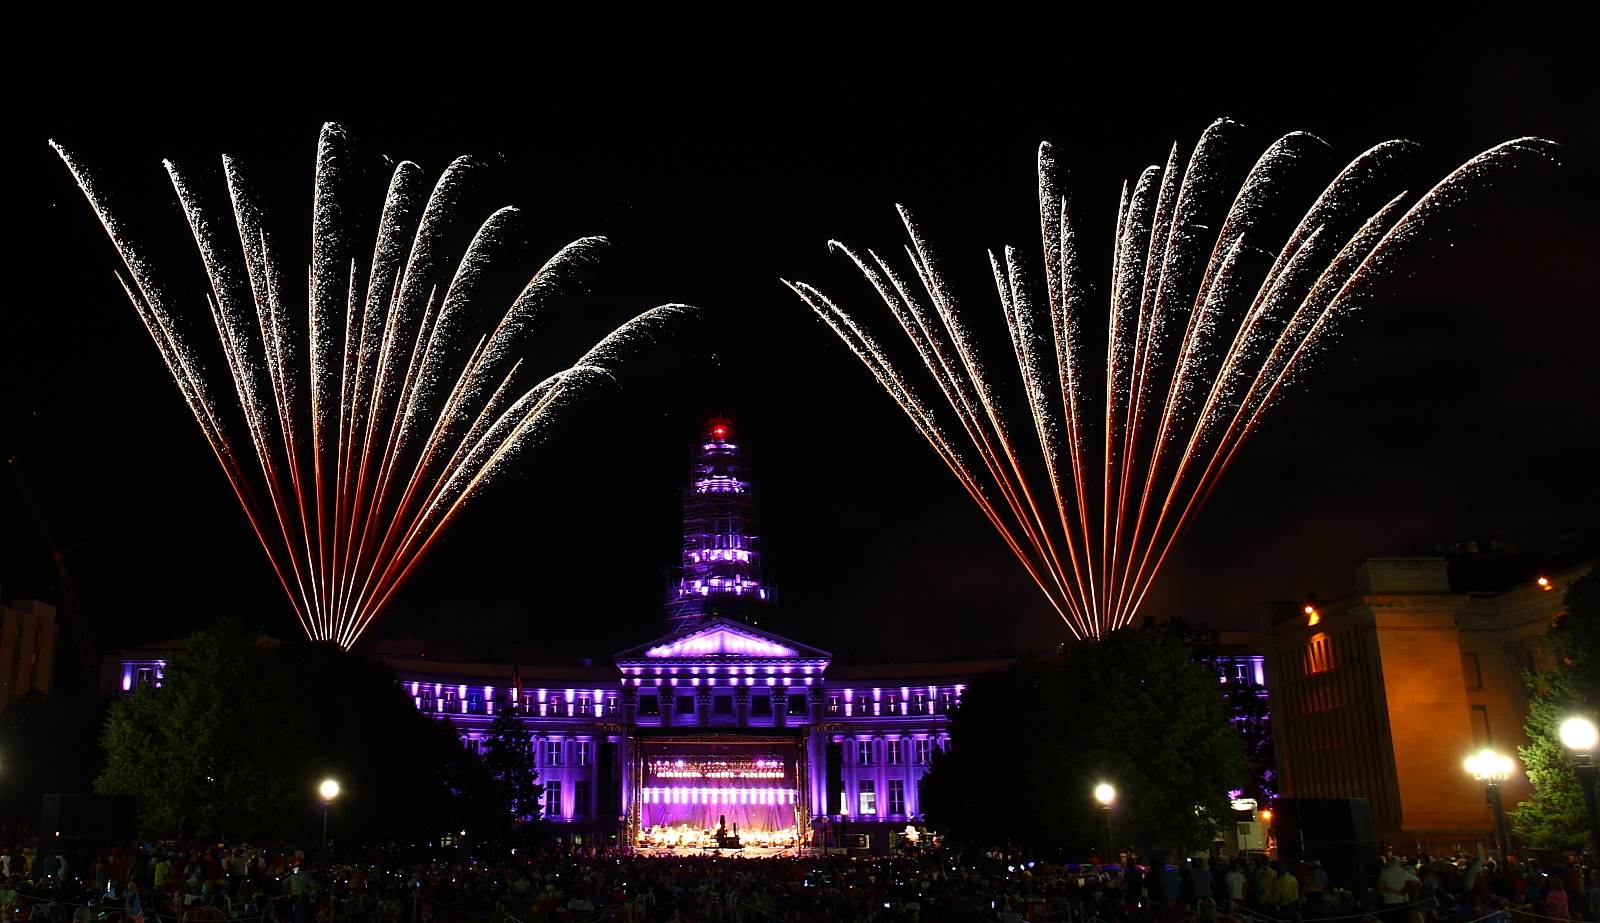 Denver Civic Center Park, 2013 - Fireworks over the Denver County Courthouse displayed along with a performance from the Denver Symphony. by Scott Smith Photos